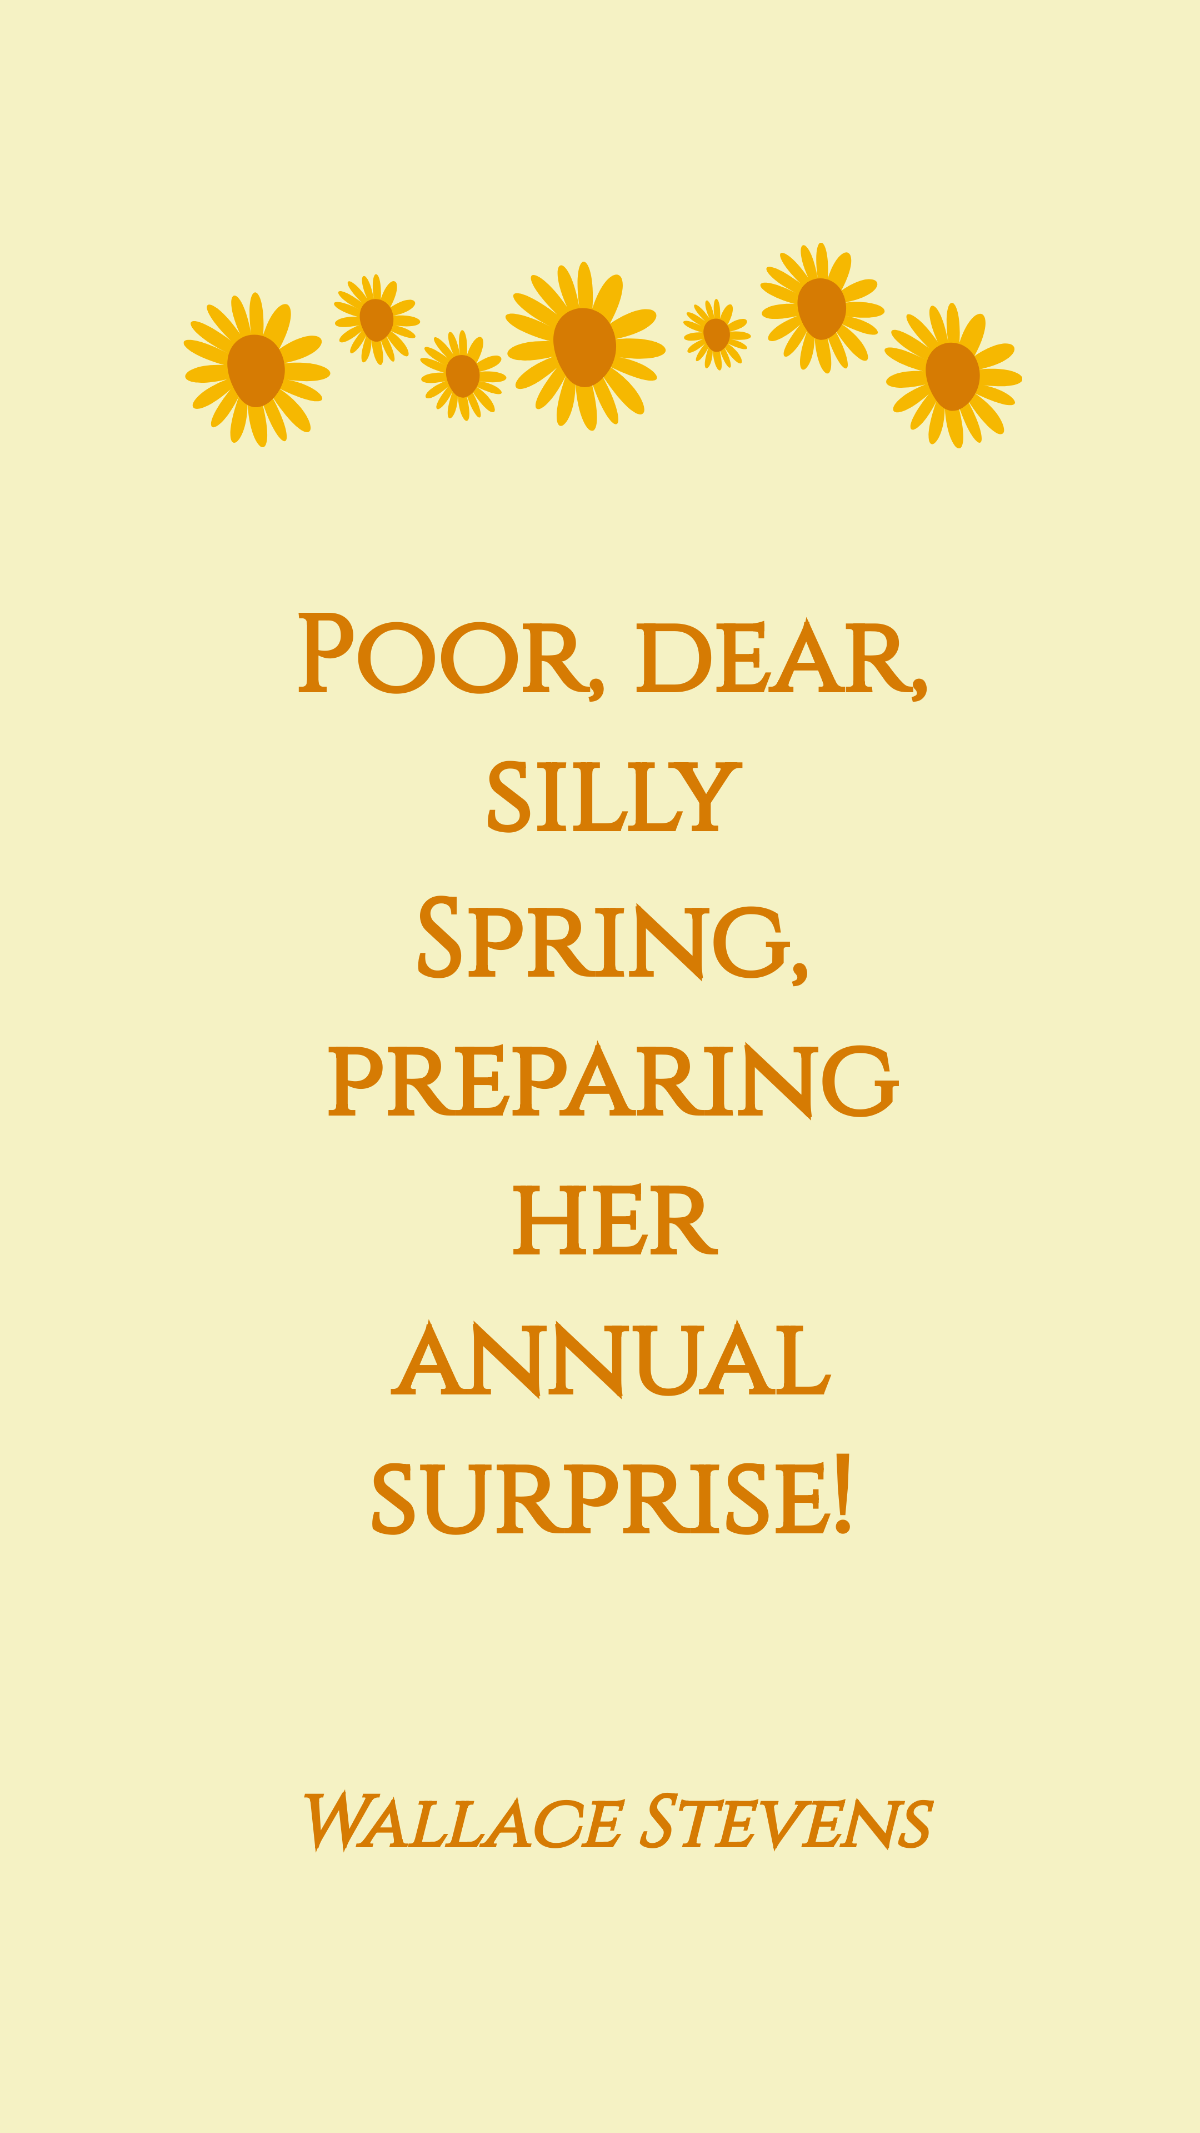 Free Wallace Stevens - Poor, dear, silly Spring, preparing her annual surprise! Template